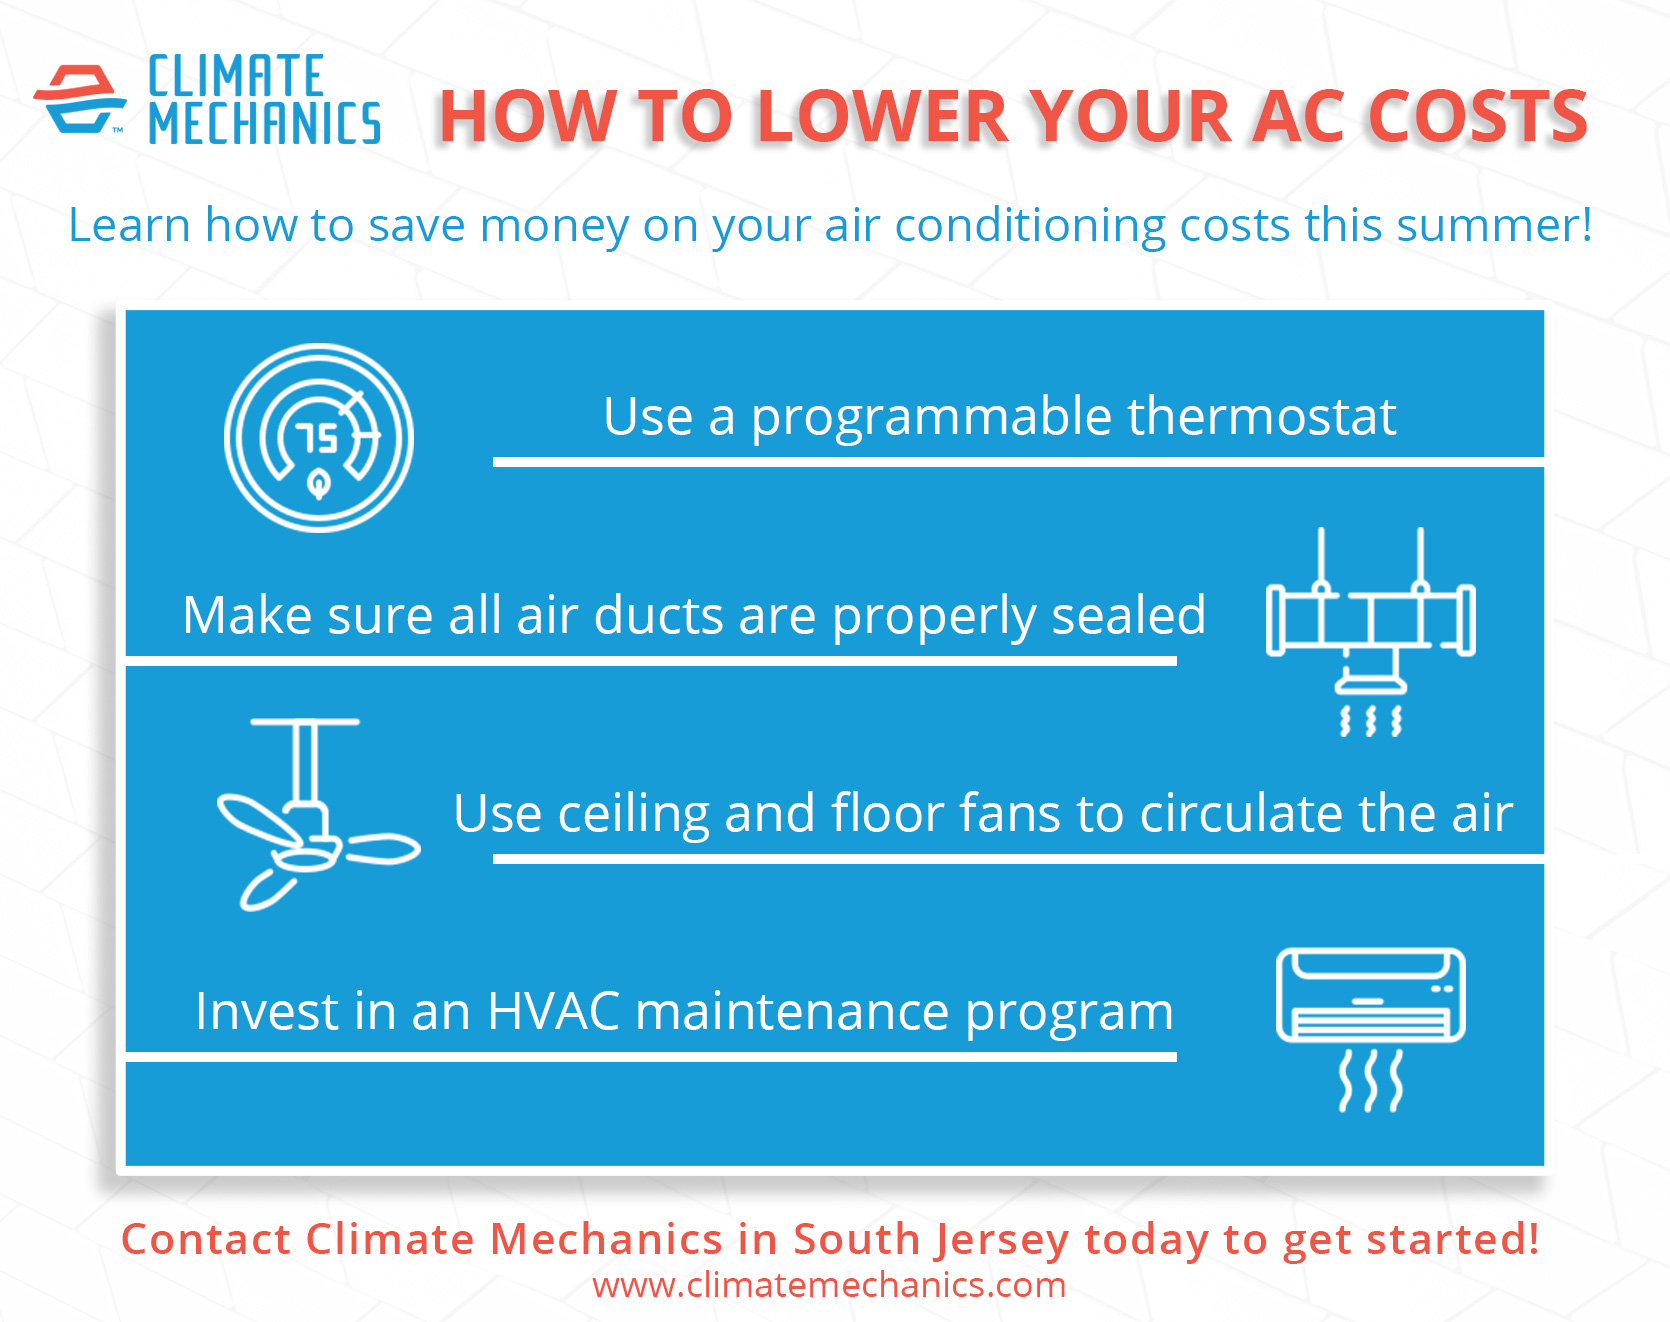 How-to-Lower-Your-AC-Costs-6285019aeae9a